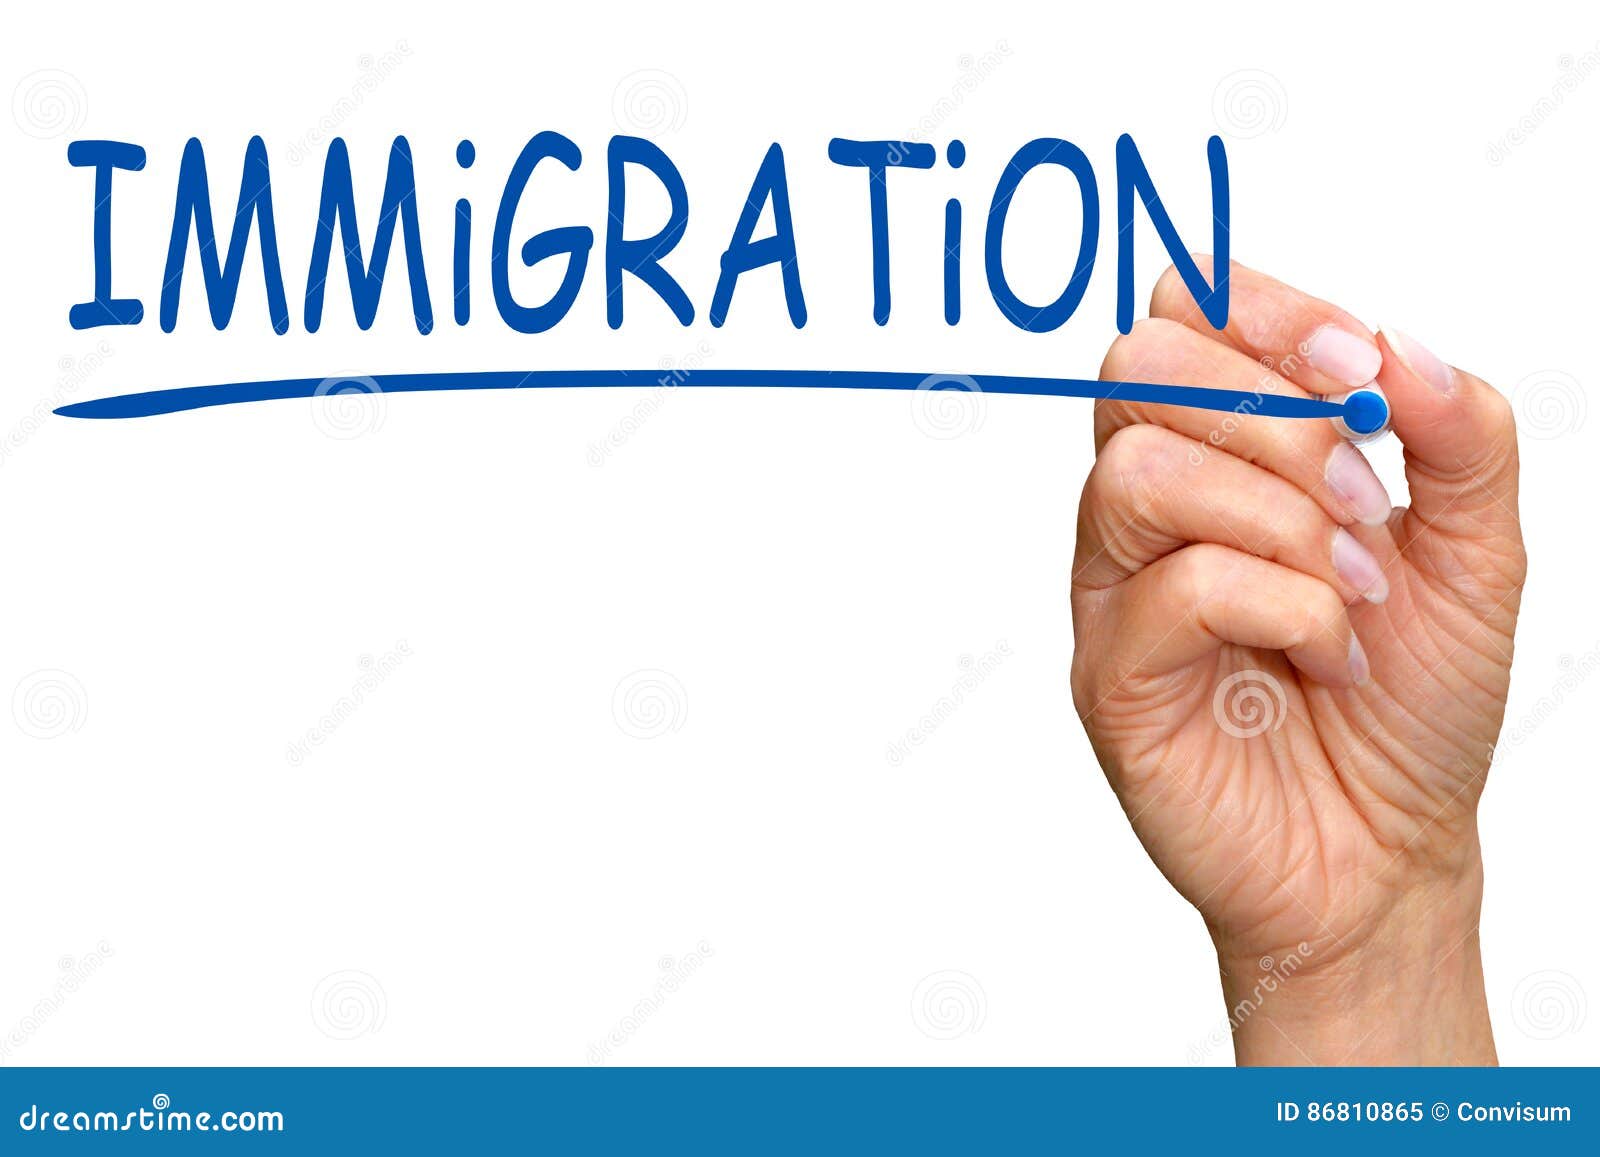 immigration - female hand writing text